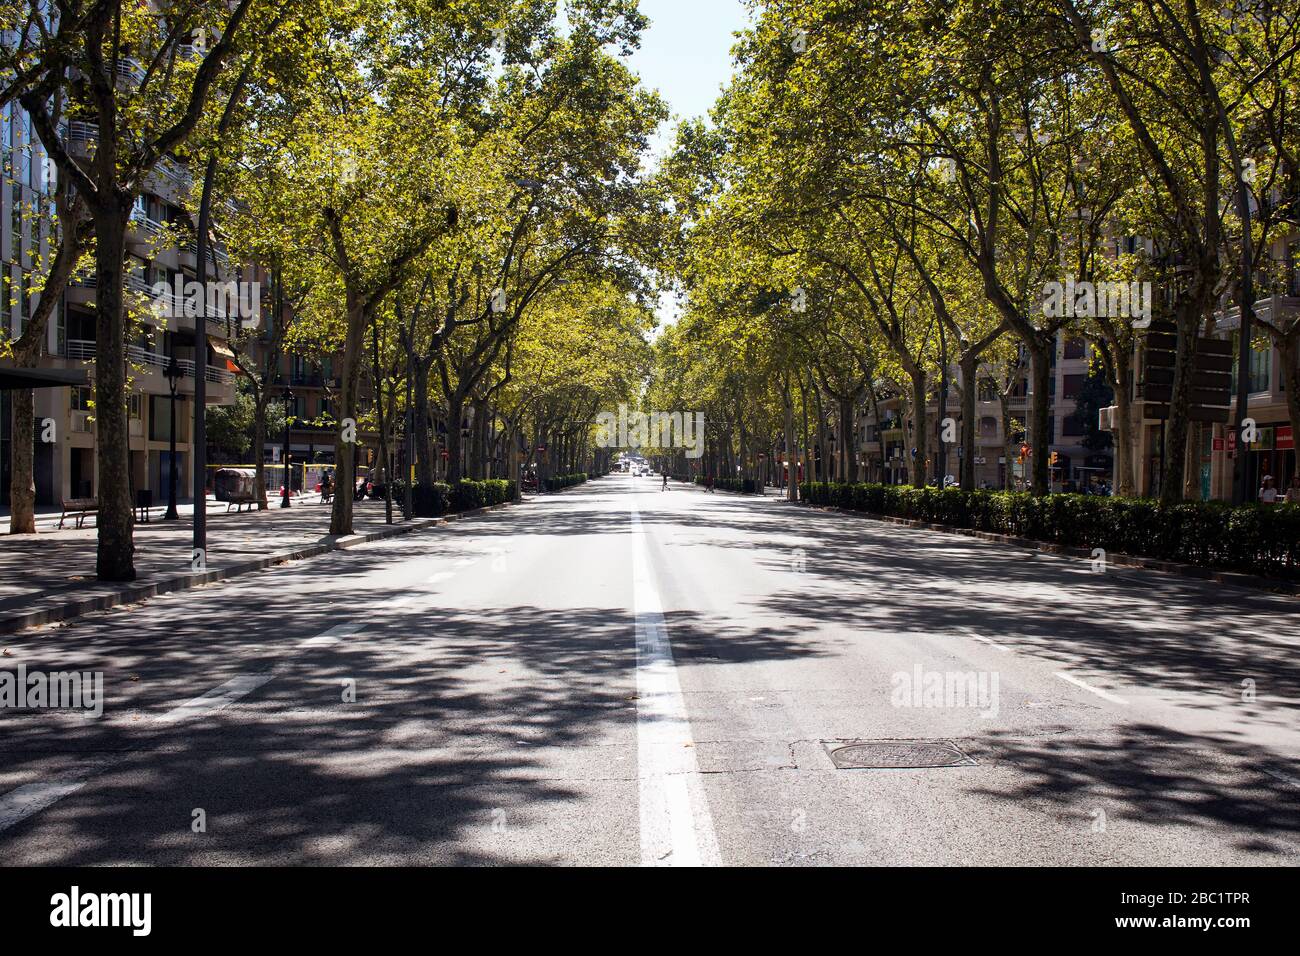 View of one of the main avenues called 'Gran Via de les Corts Catalanes' in Barcelona. Trees and their shadows creates dramatic scene. It is a sunny s Stock Photo